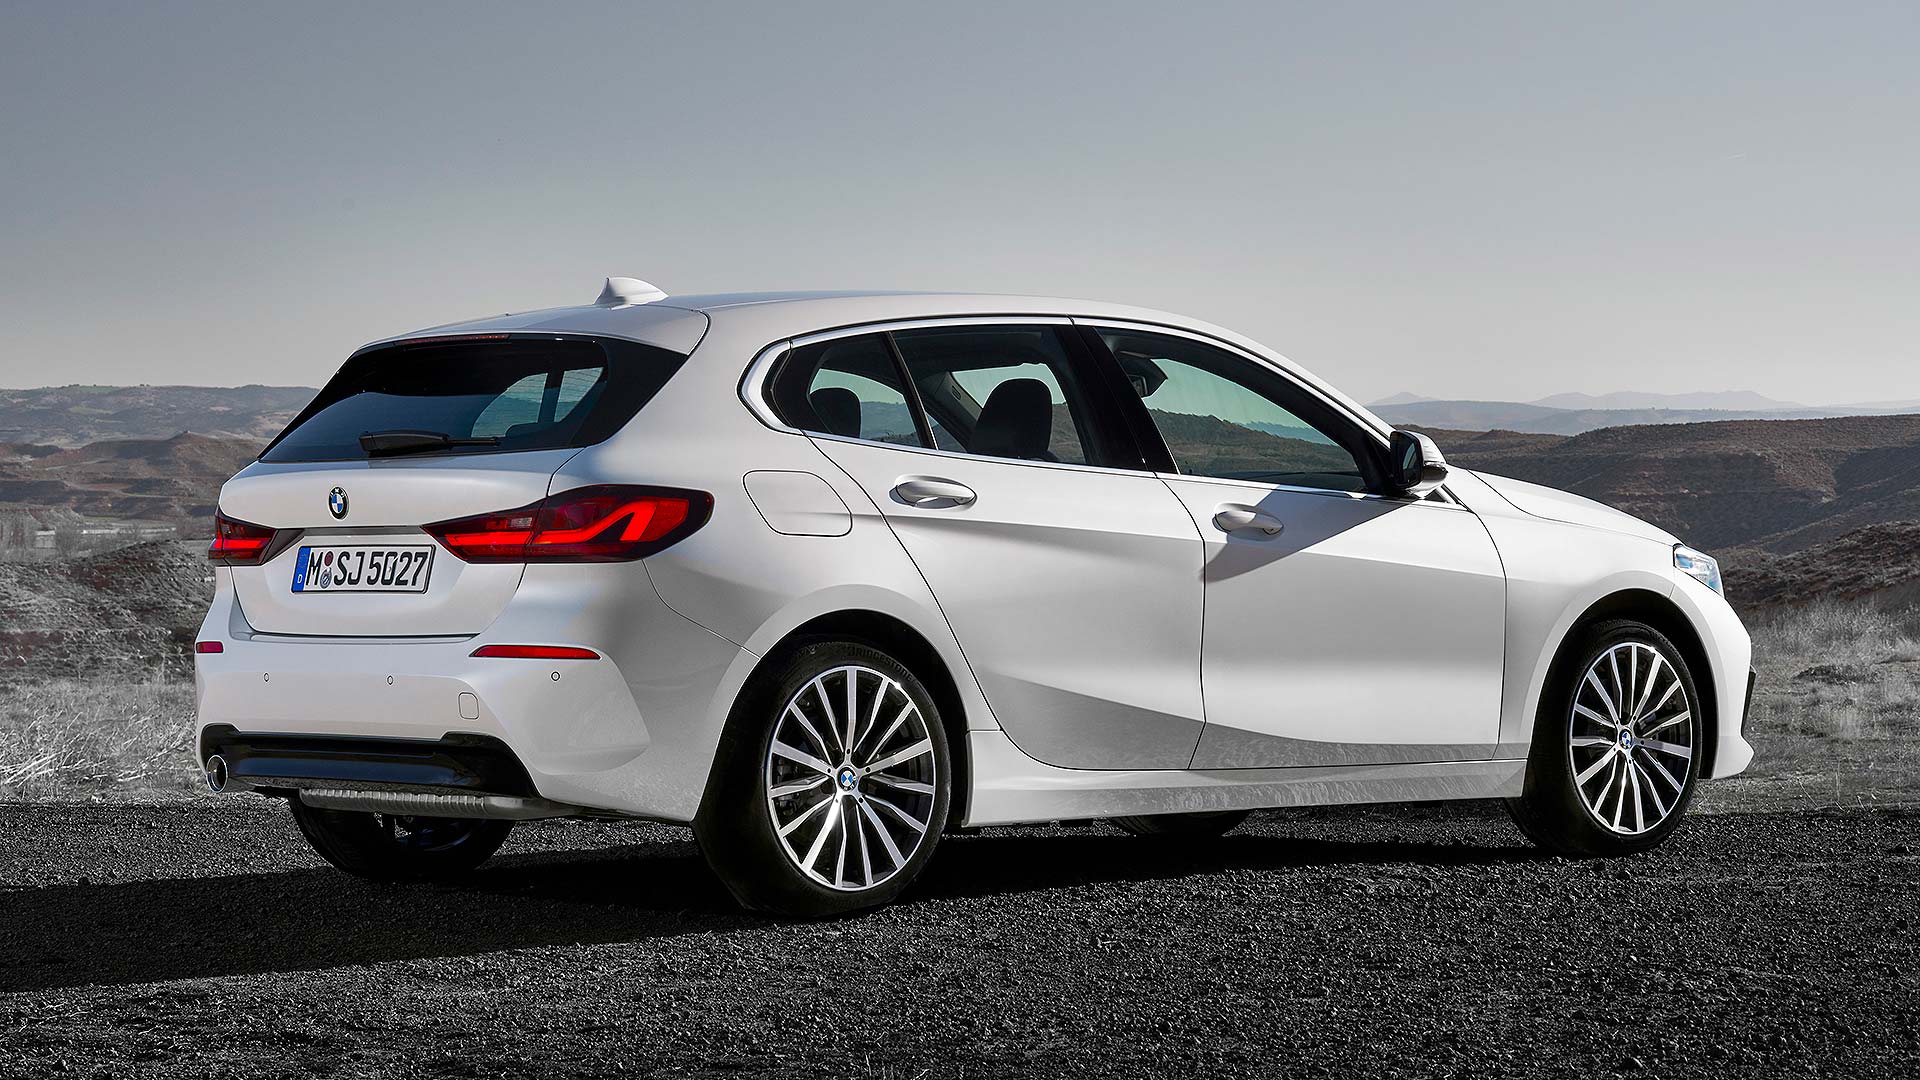 New BMW 1 Series revealed: full details of the £24,430 premium hatch ...